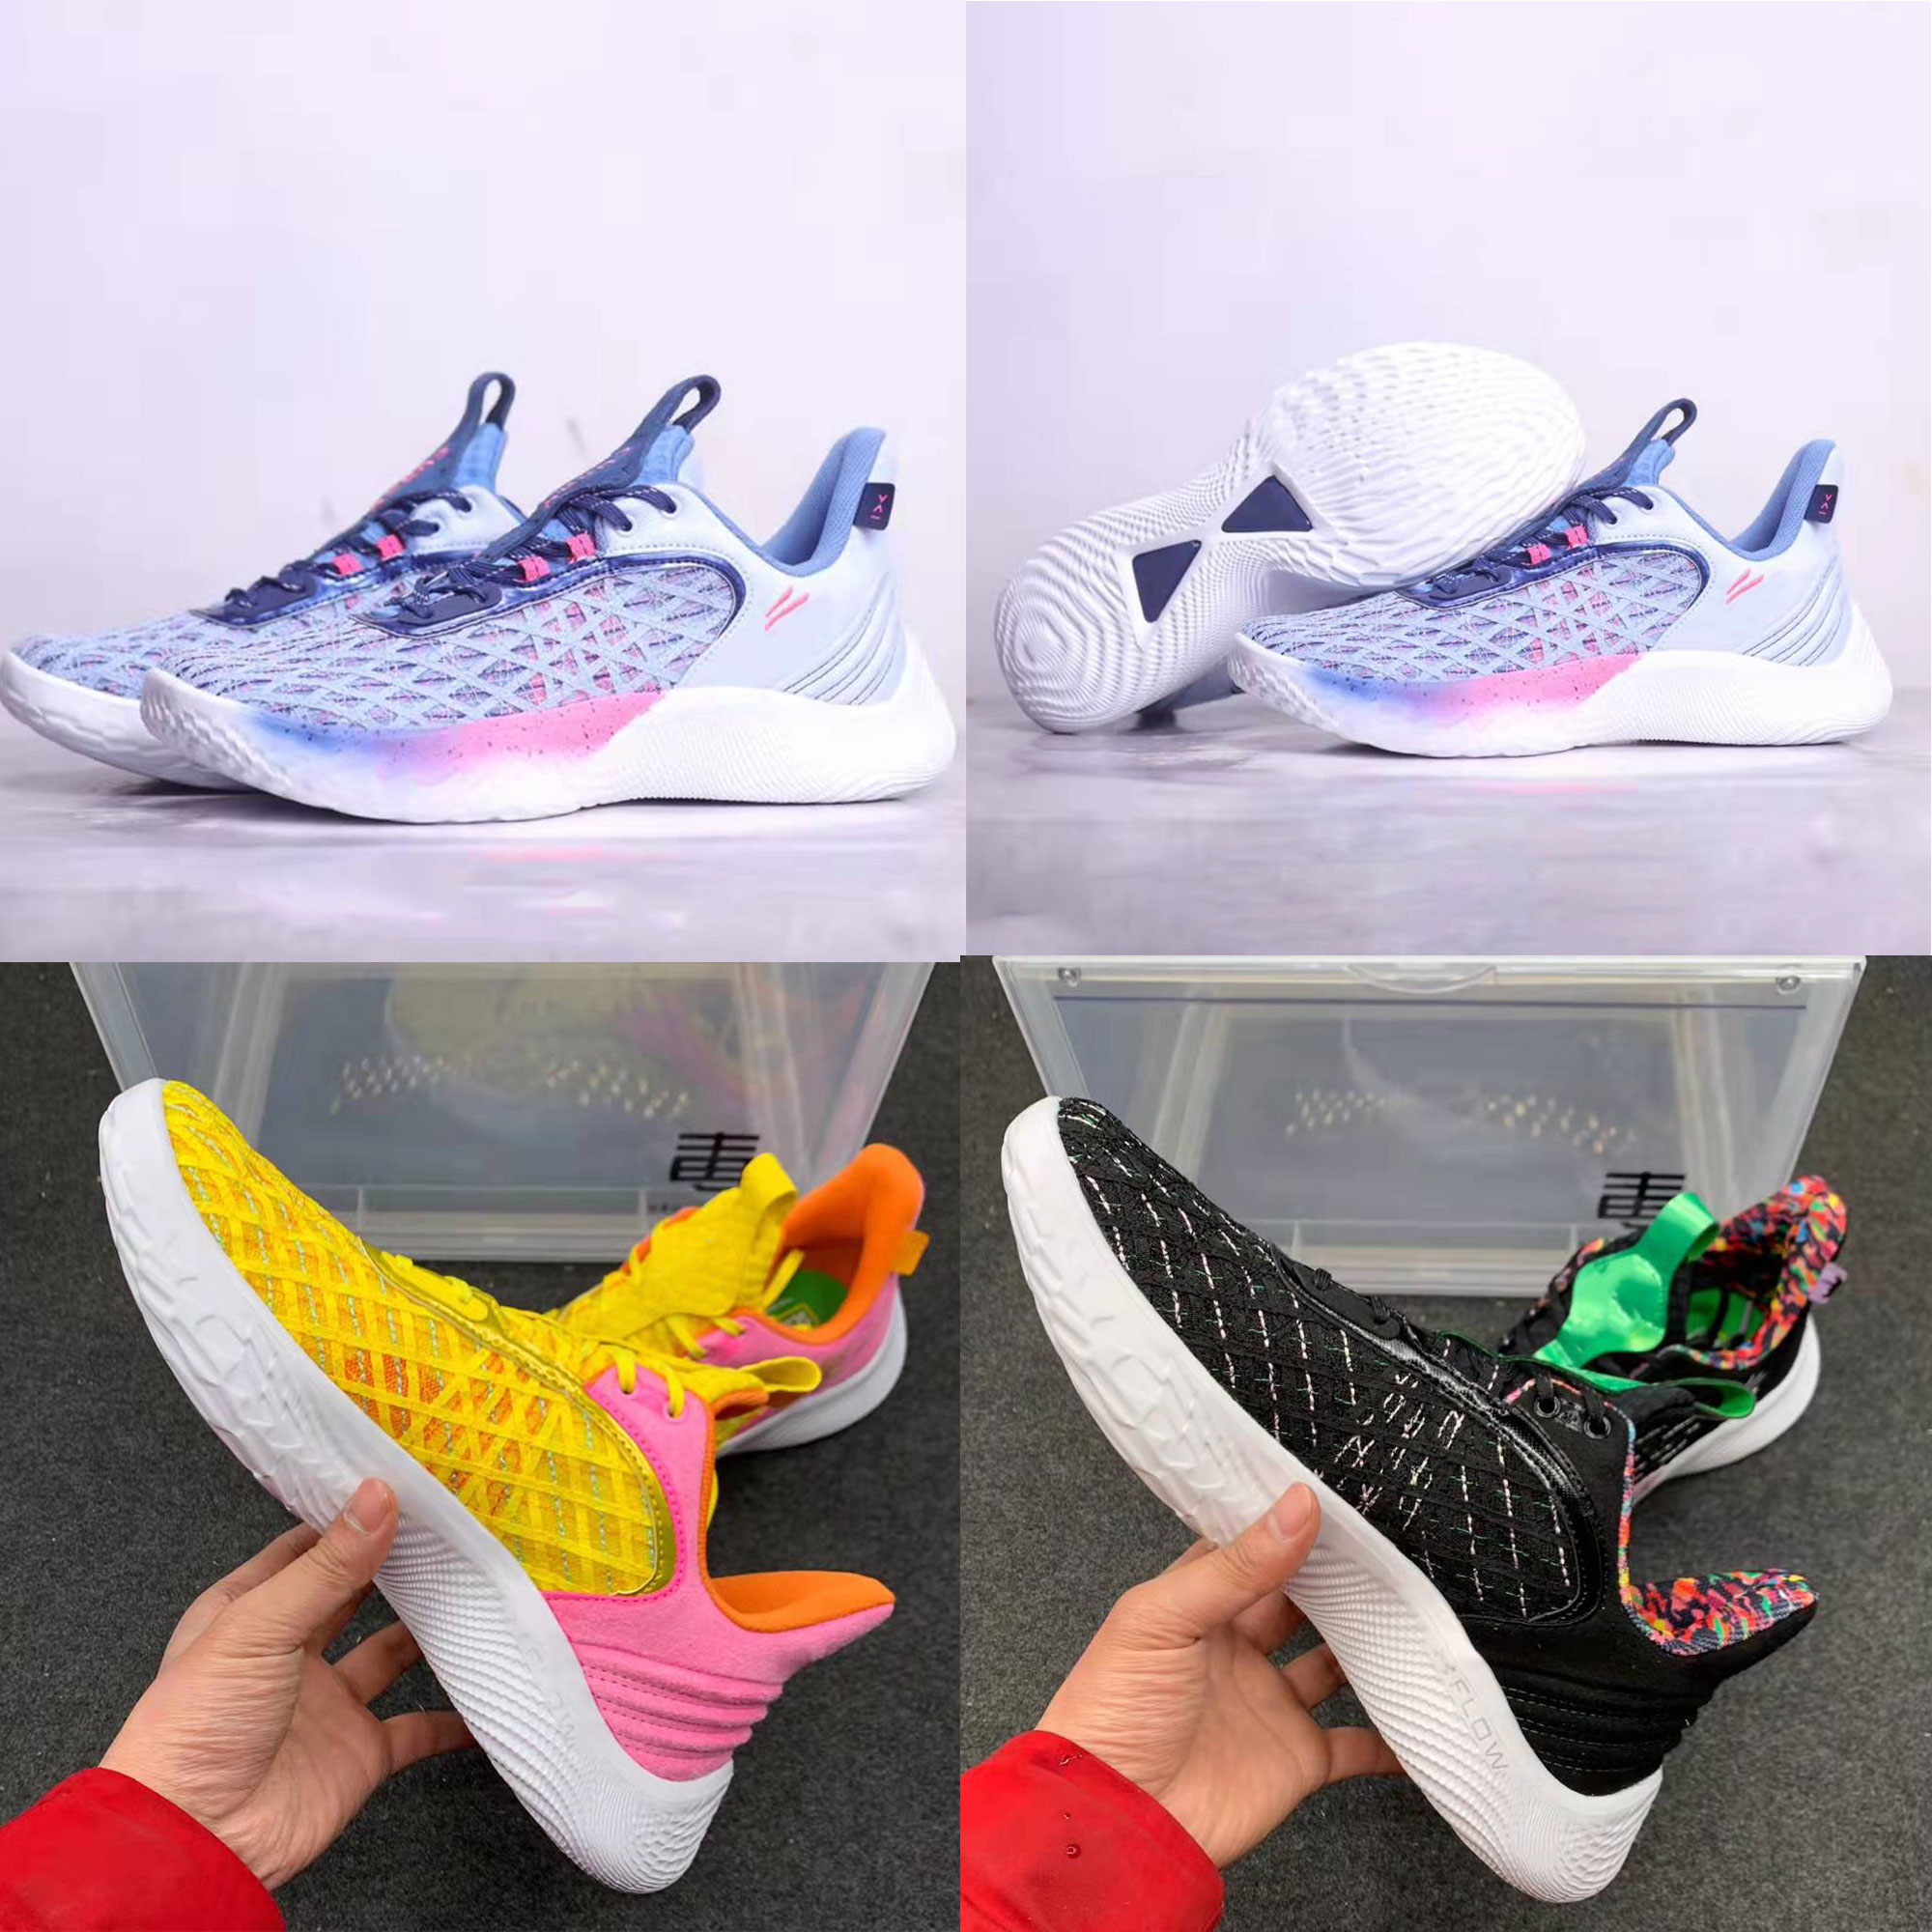 

2022 NEW Curry Flow 9 Warp The Game Day Mens Basketball Shoes Sesame Street Play Big Count It Casual Shoes Running Sneaker, Box